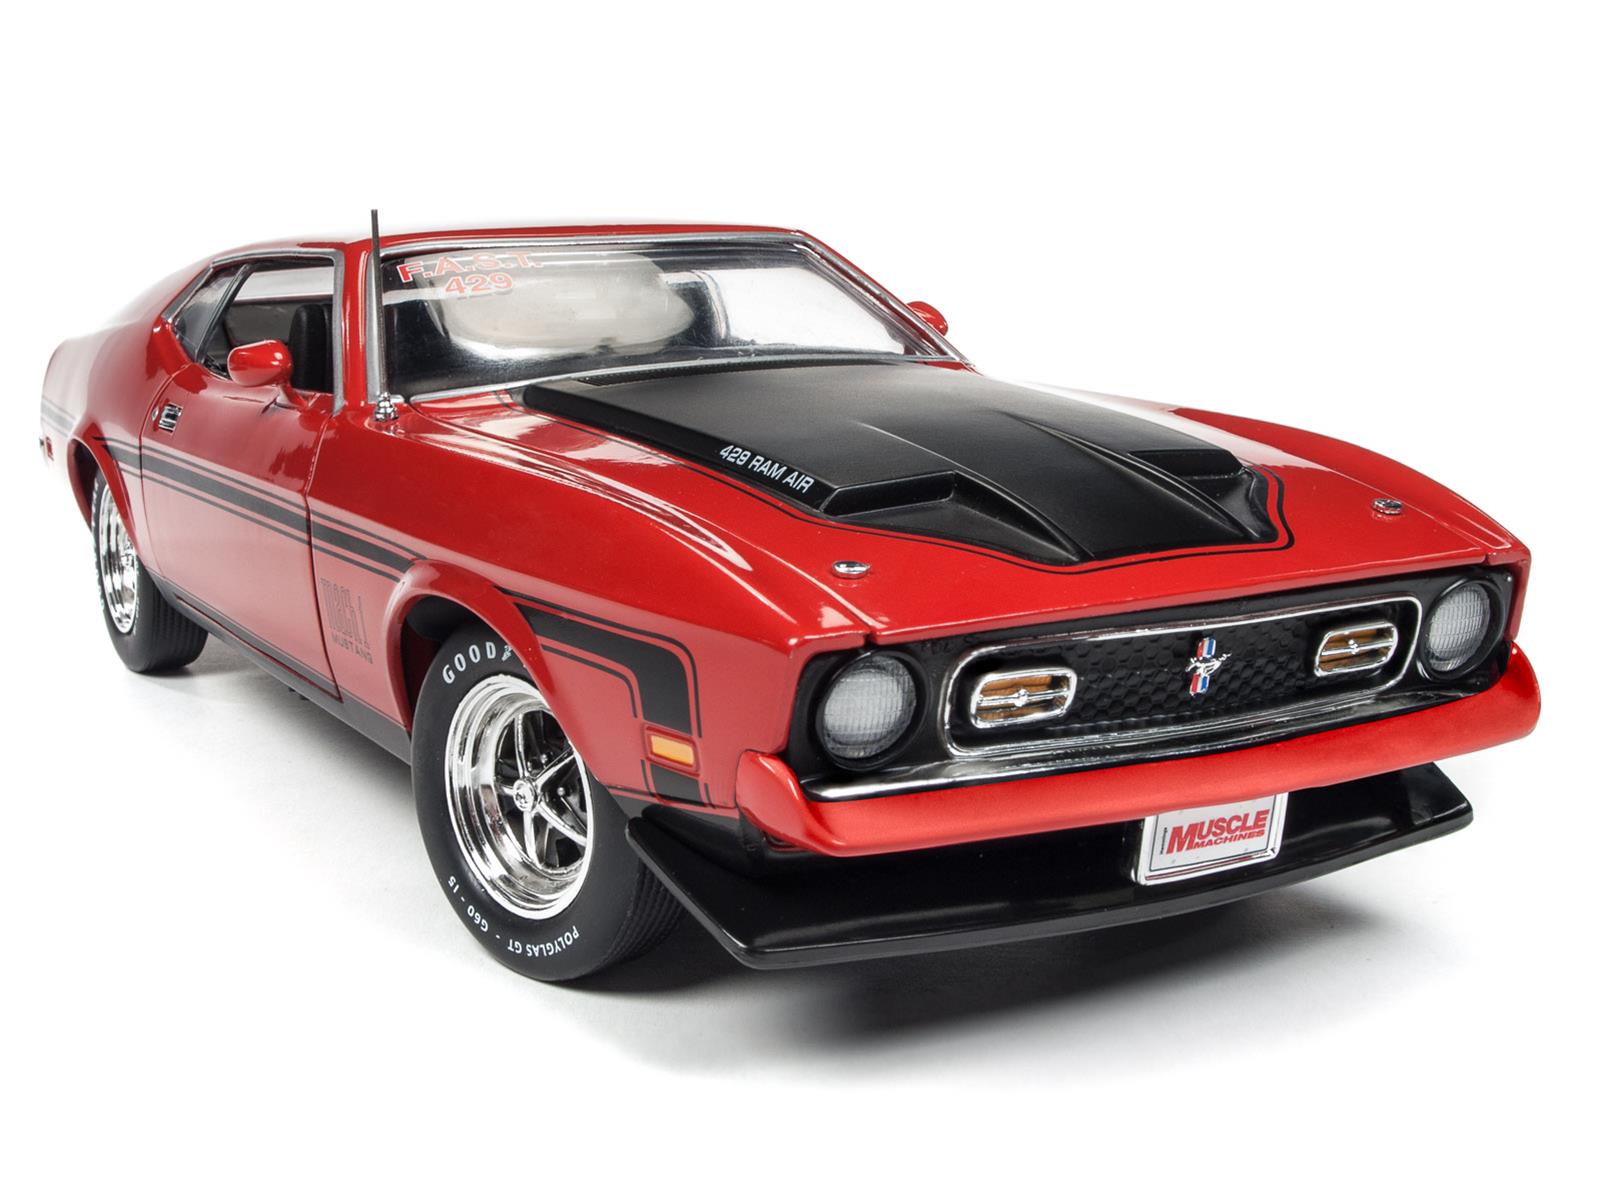 AUTO WORLD AMM1150 1:18 Scale 1971 Ford Mustang Mach 1 Diecast Model ...